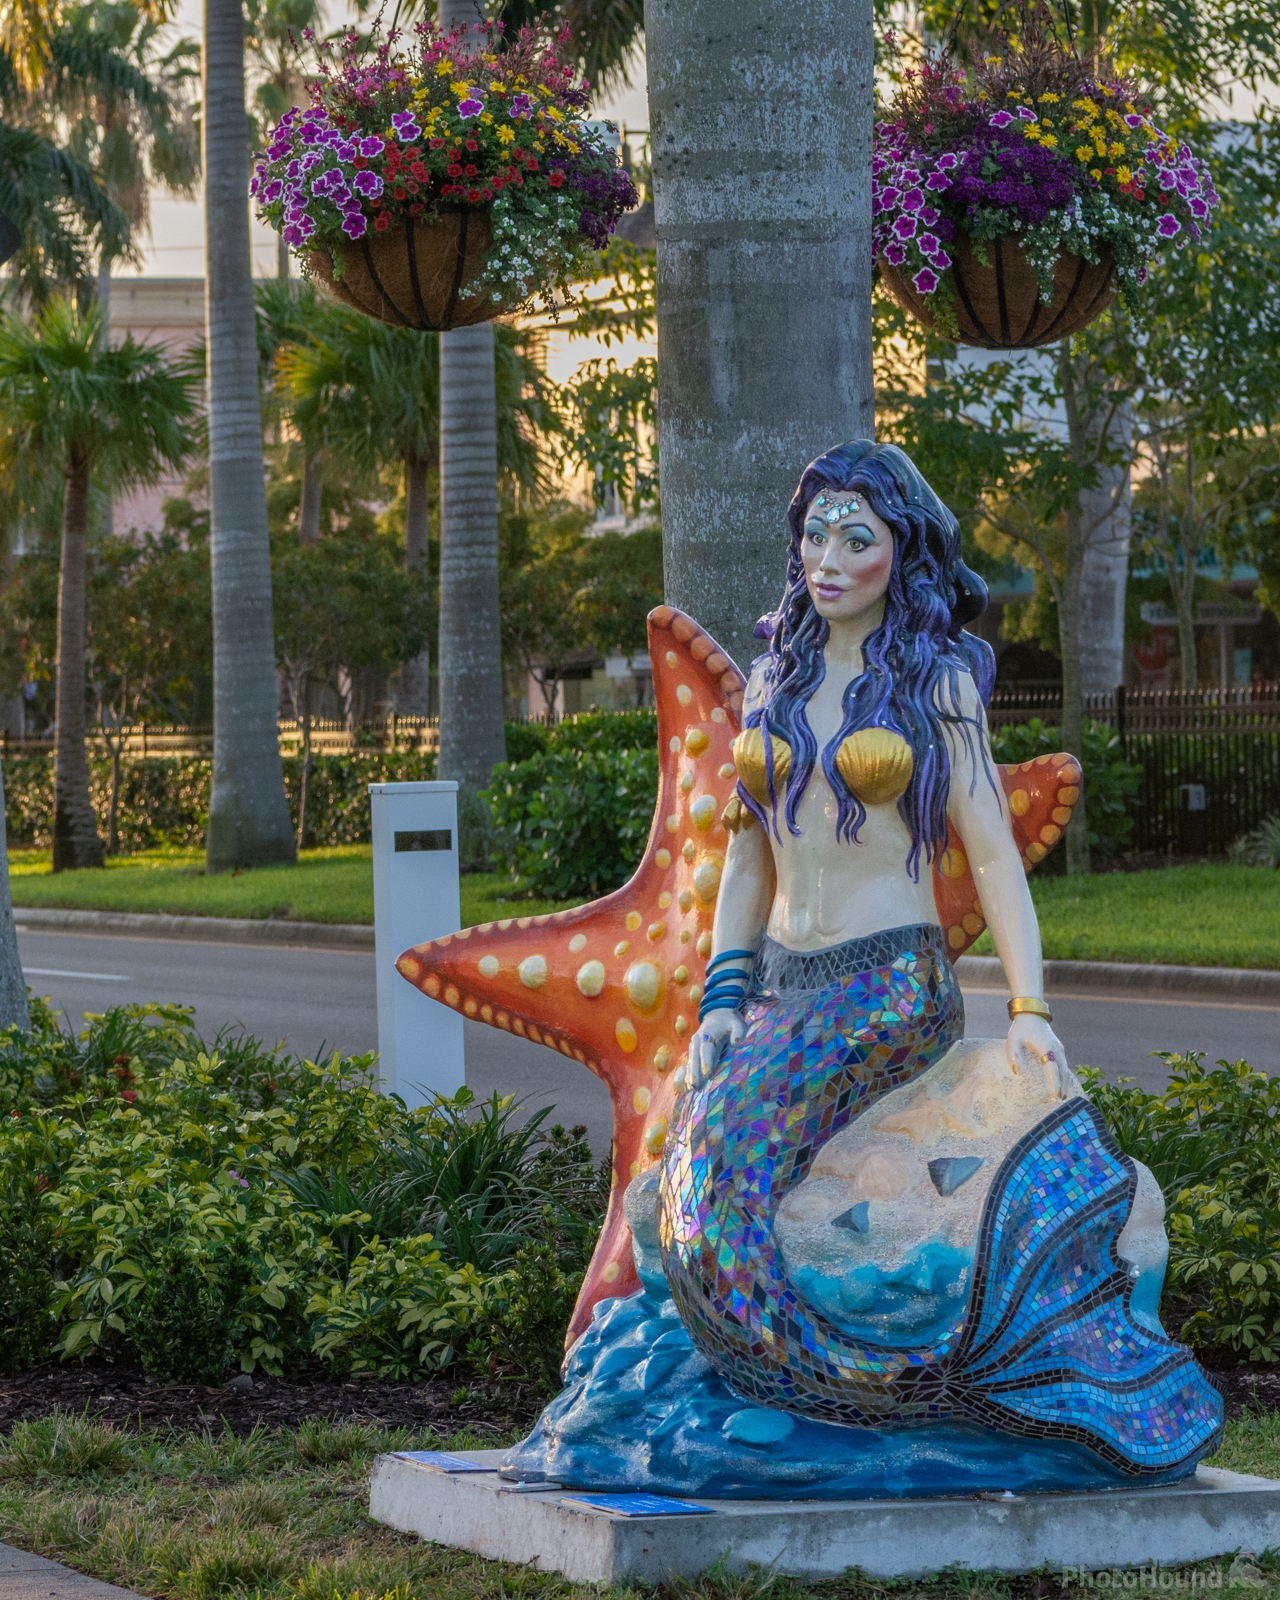 Image of West Venice Ave, Venice, Florida by Wayne Foote